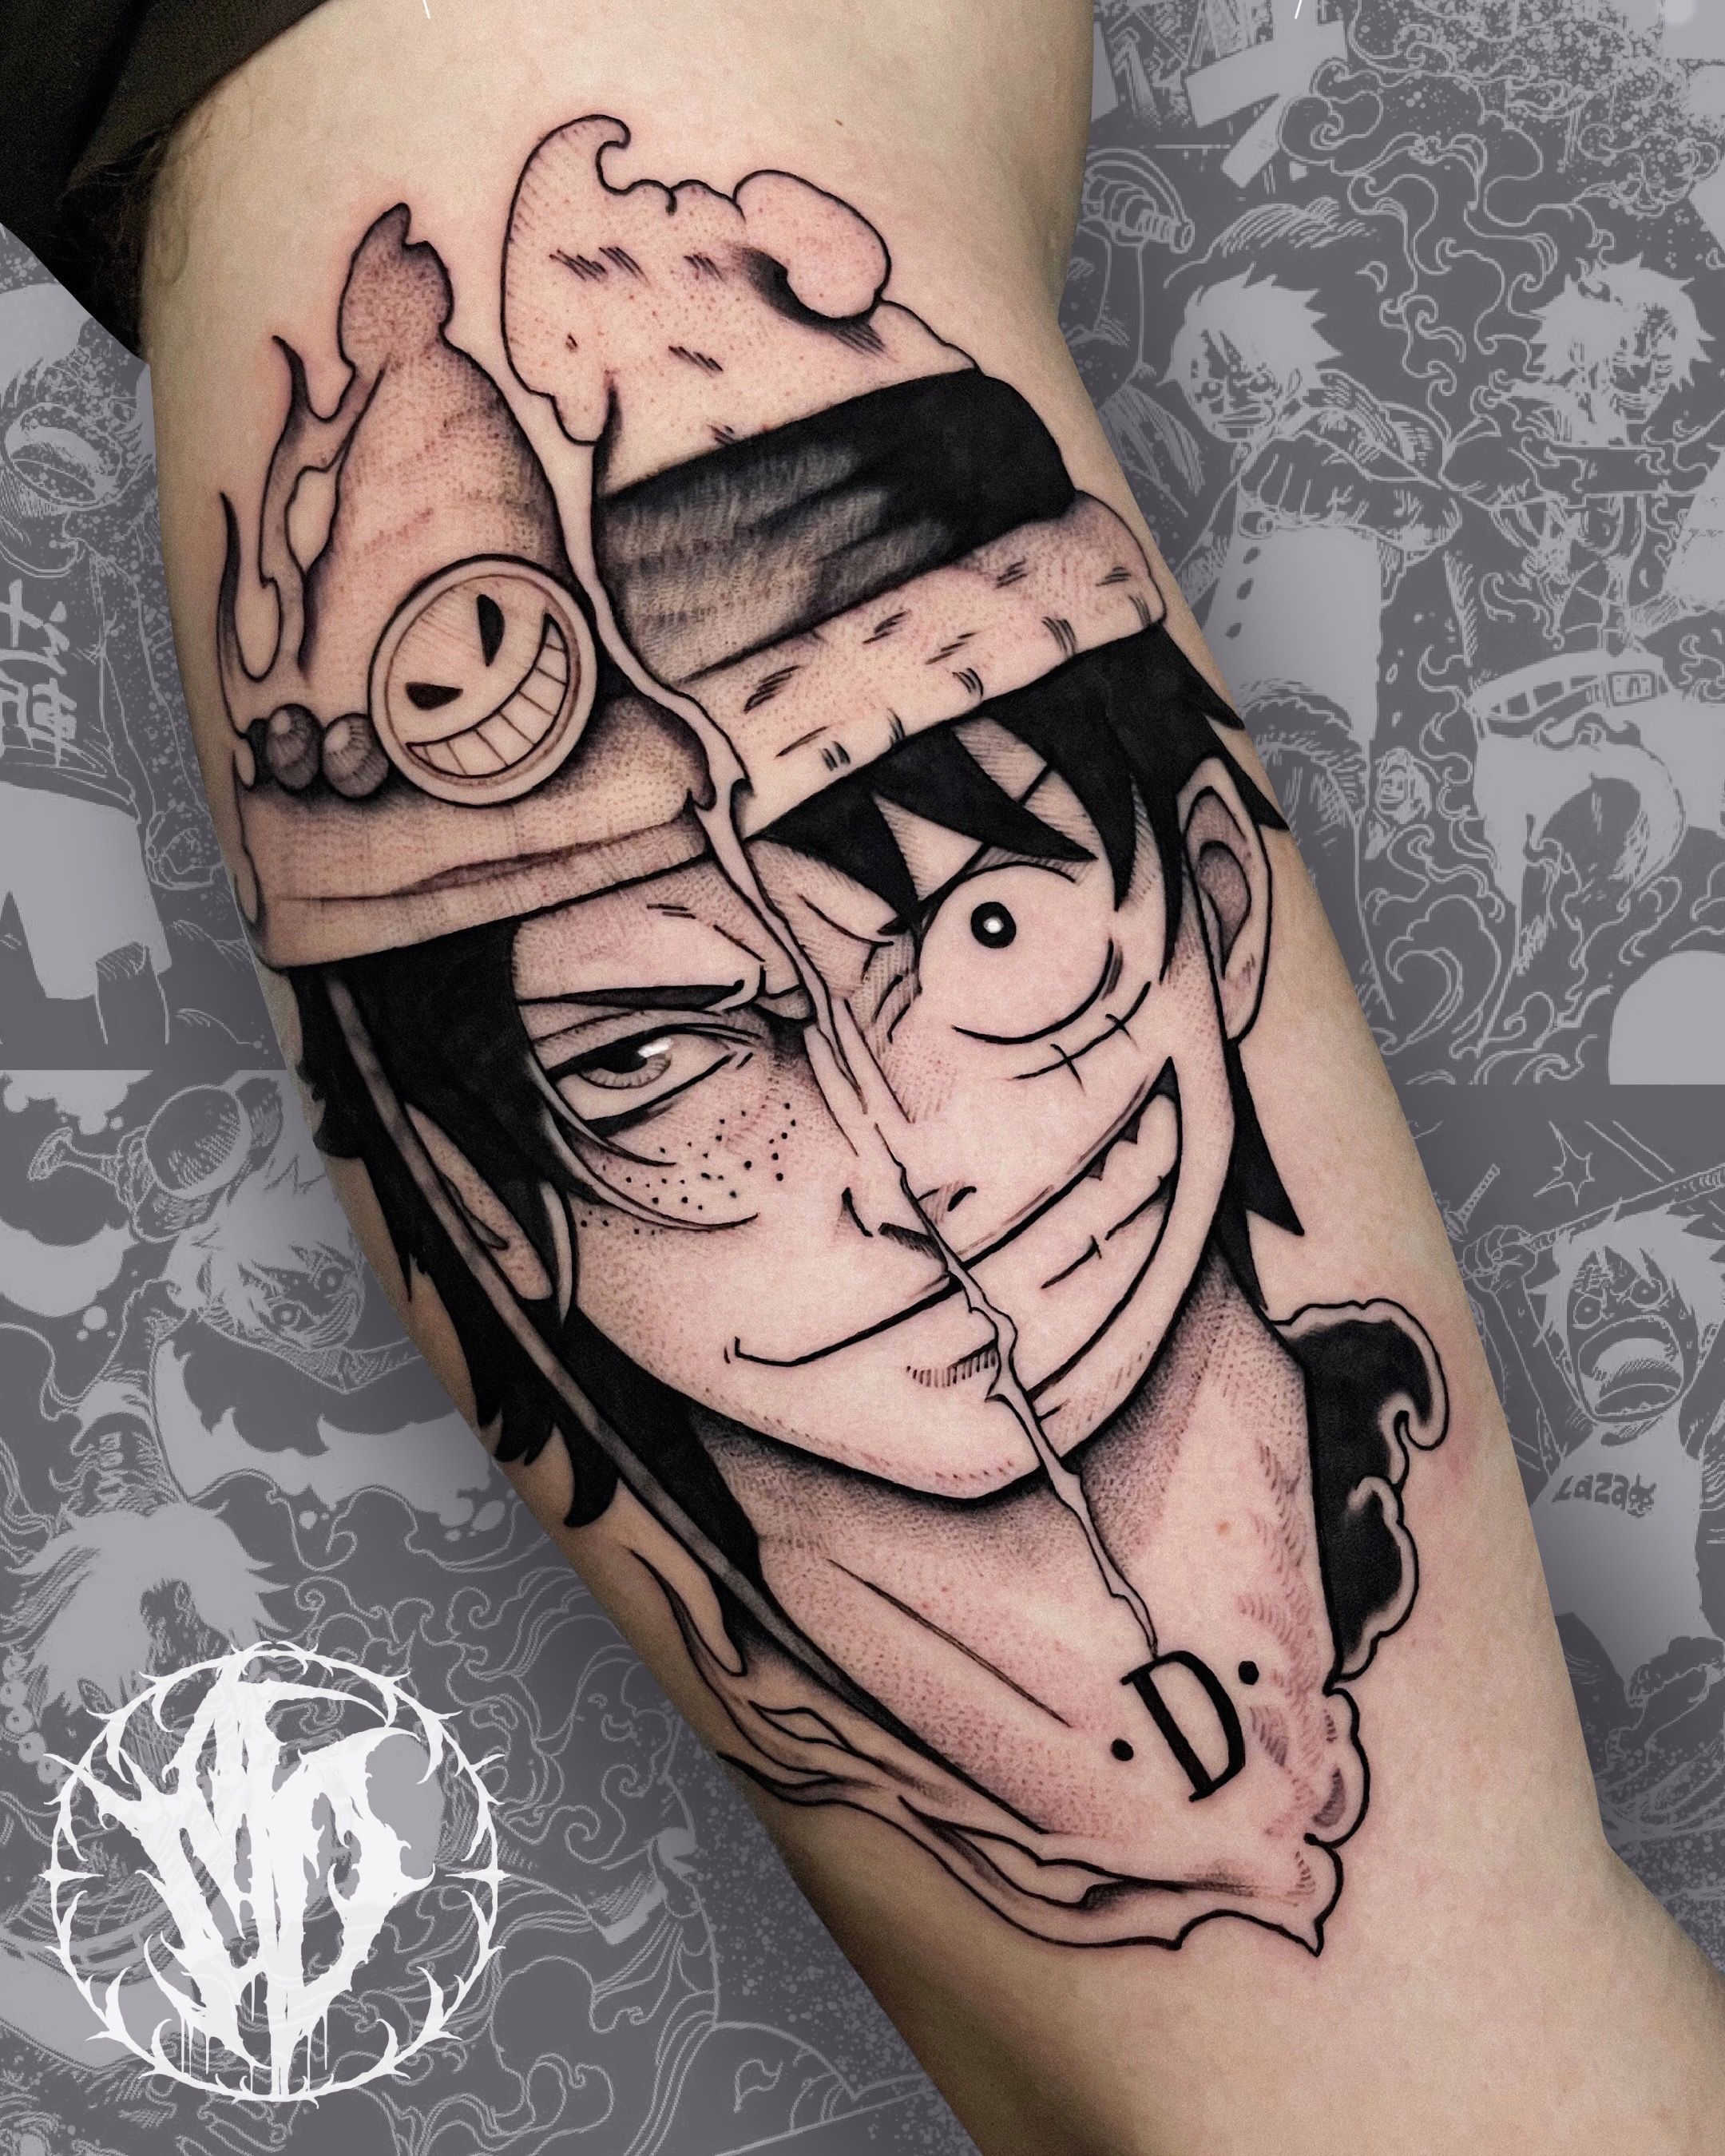 11+ Anime Eyes Tattoo Ideas That Will Blow Your Mind! - alexie